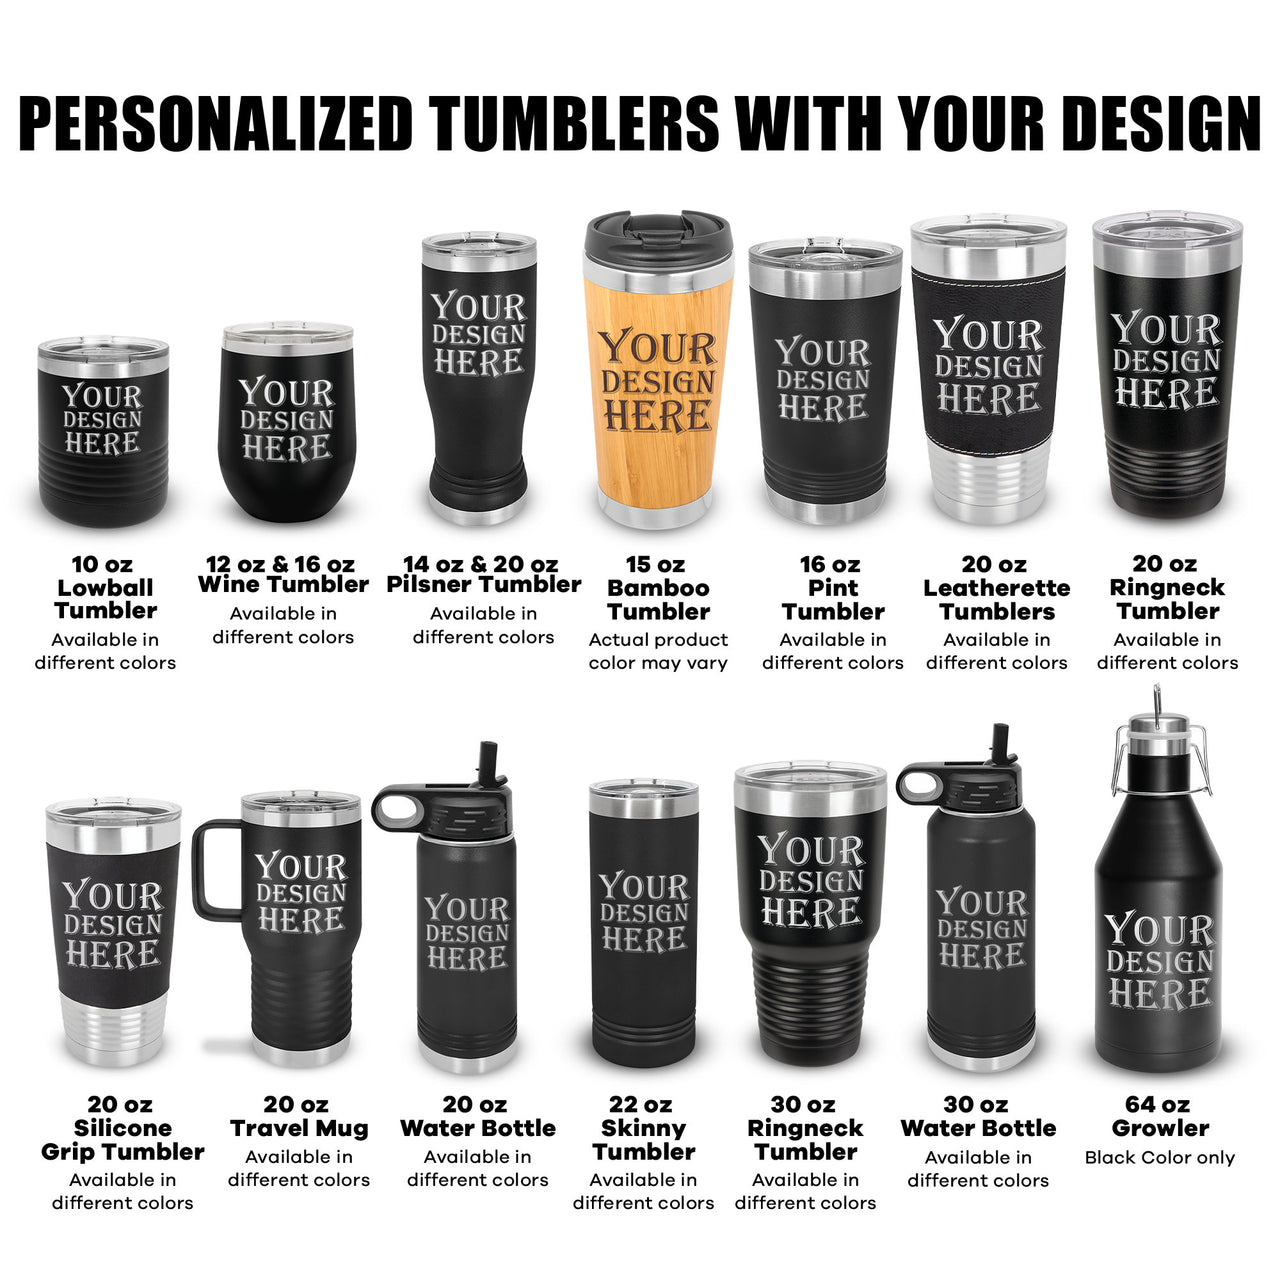 Custom Tumbler, Stocking Up Because it wasn't Raining When Noah Started Building The Ark Funny Tumbler Design with Saying, Gun Lover Gifts